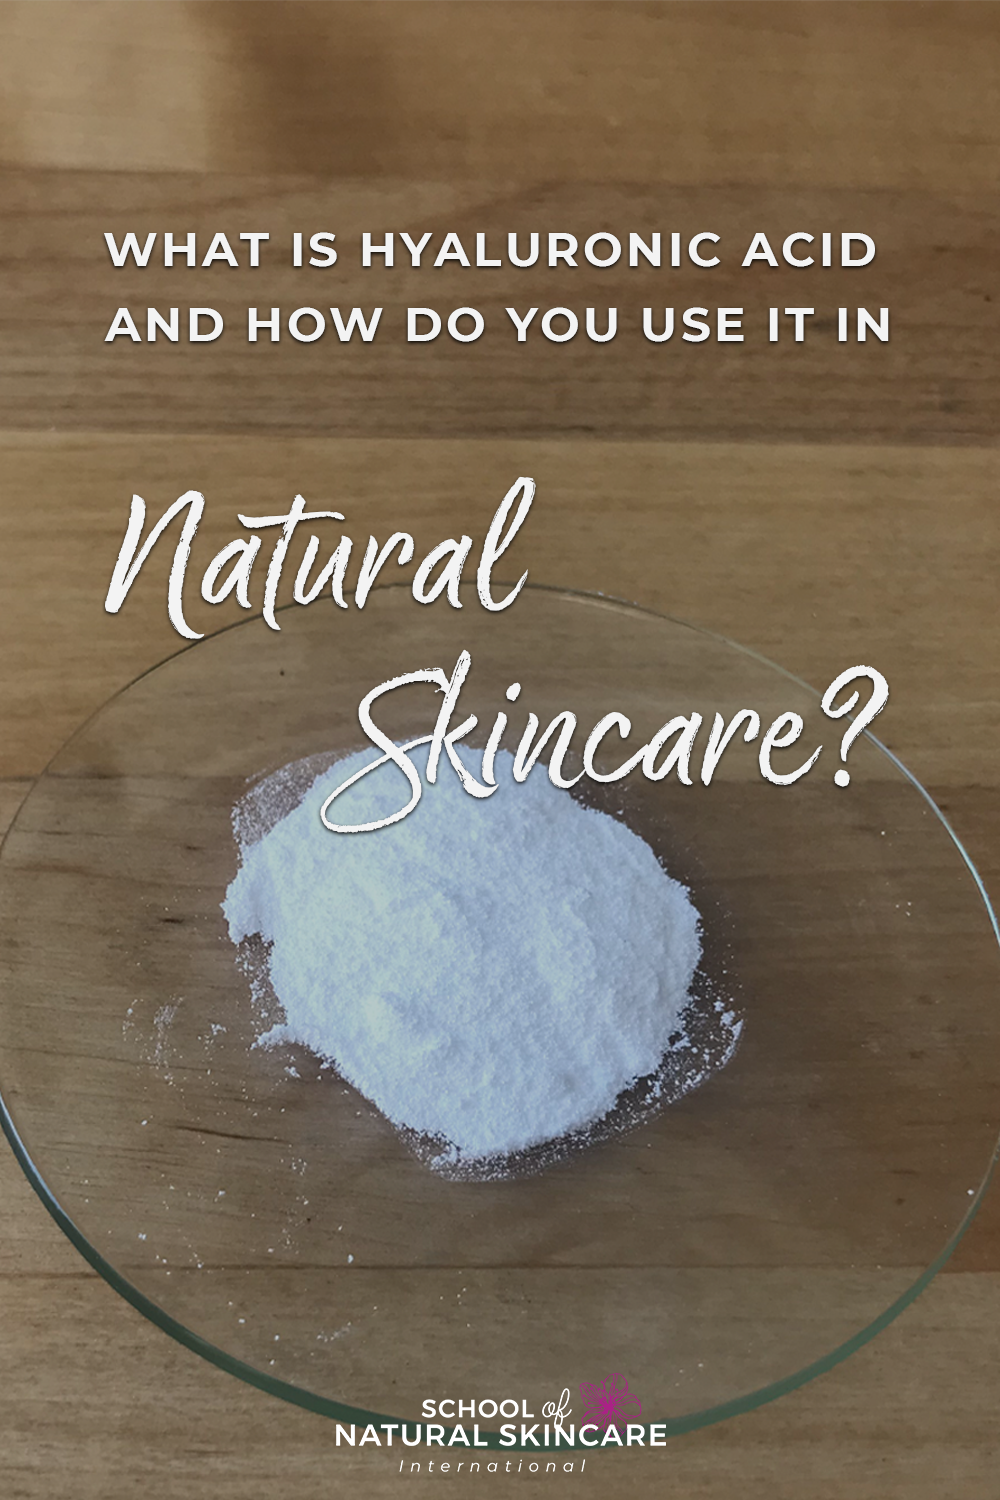 What is hyaluronic acid and how do you use it in natural skincare? Natural Skincare Ingredients 